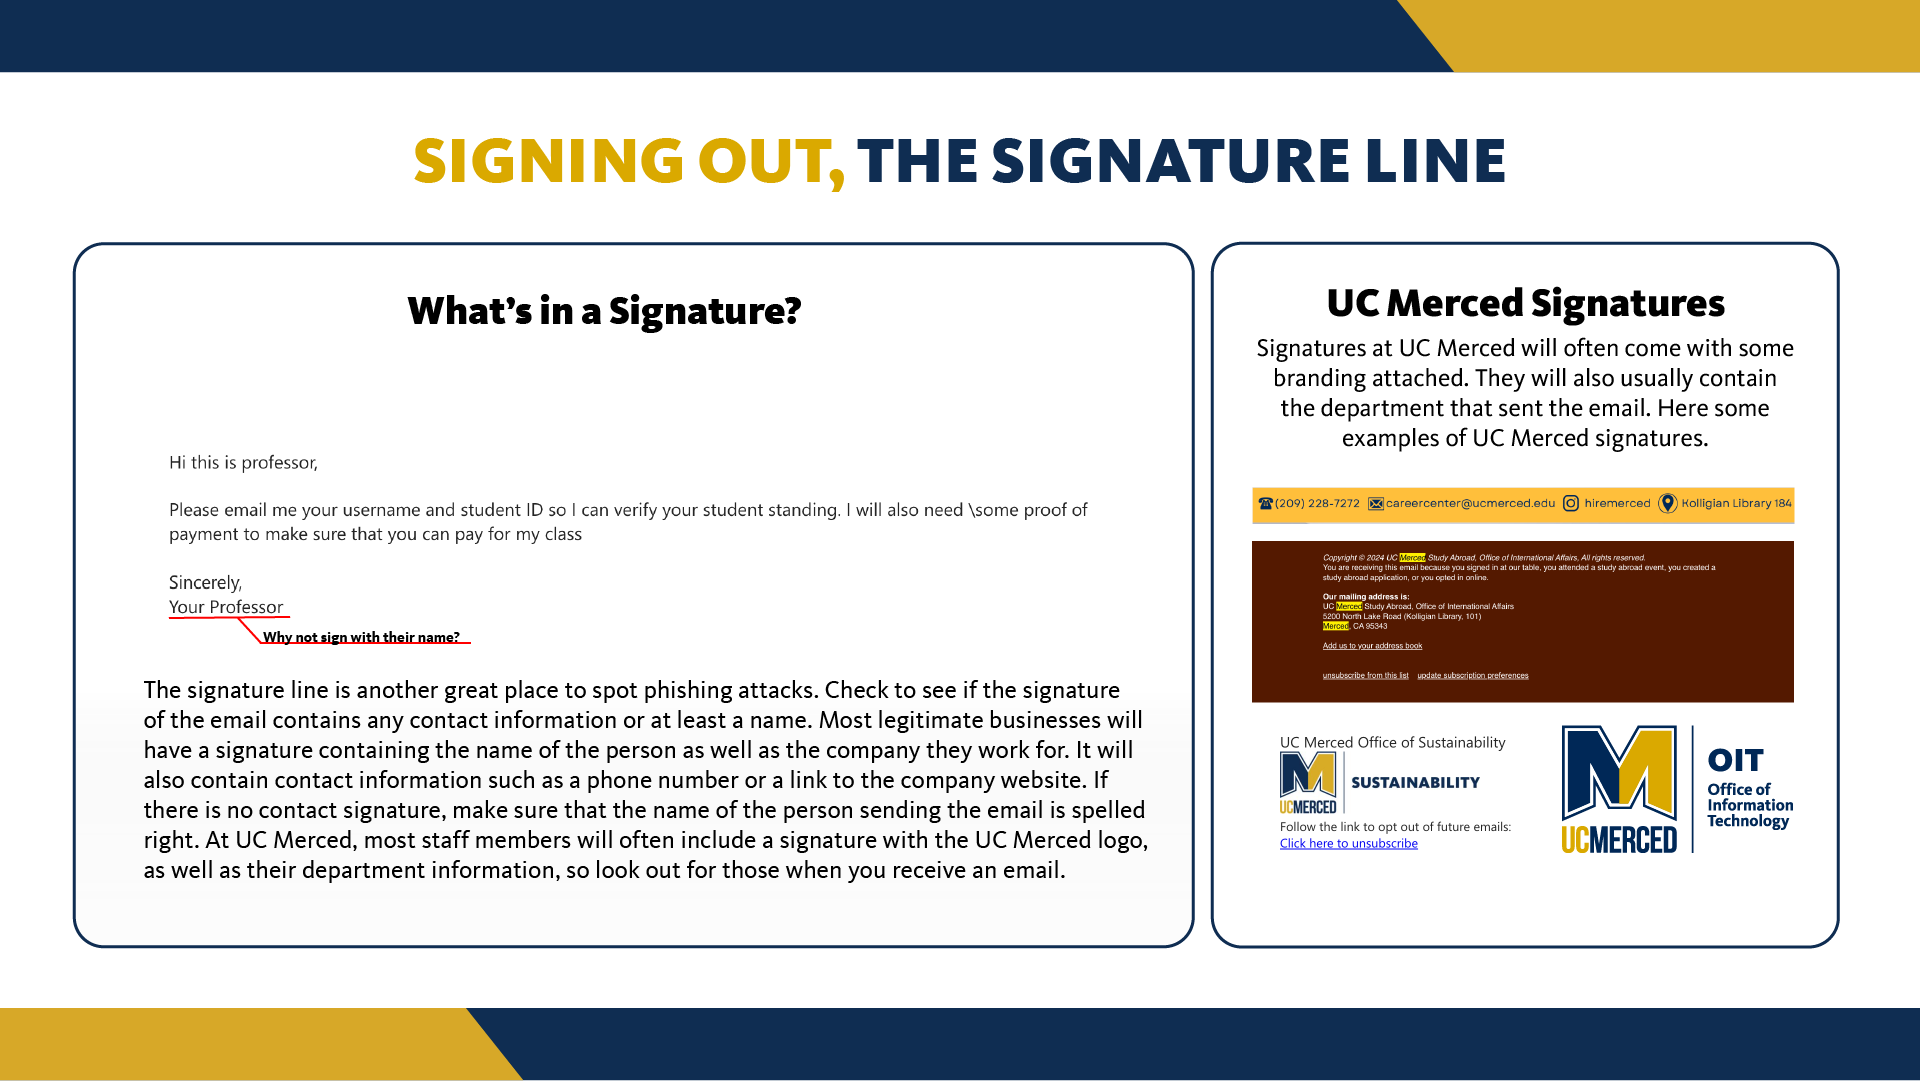 The signature line is another great place to spot phishing attacks. Check to see if the signature of the email contains any contact information or at least a name. Most legitimate businesses will have a signature containing the name of the person as well as the company they work for. It will also contain contact information such as a phone number or a link to the company website. If there is no contact signature, make sure that the name of the person sending the email is spelled right. At UC Merced, most staff members will often include a signature with the UC Merced logo, as well as their department information, so look out for those when you receive an email.